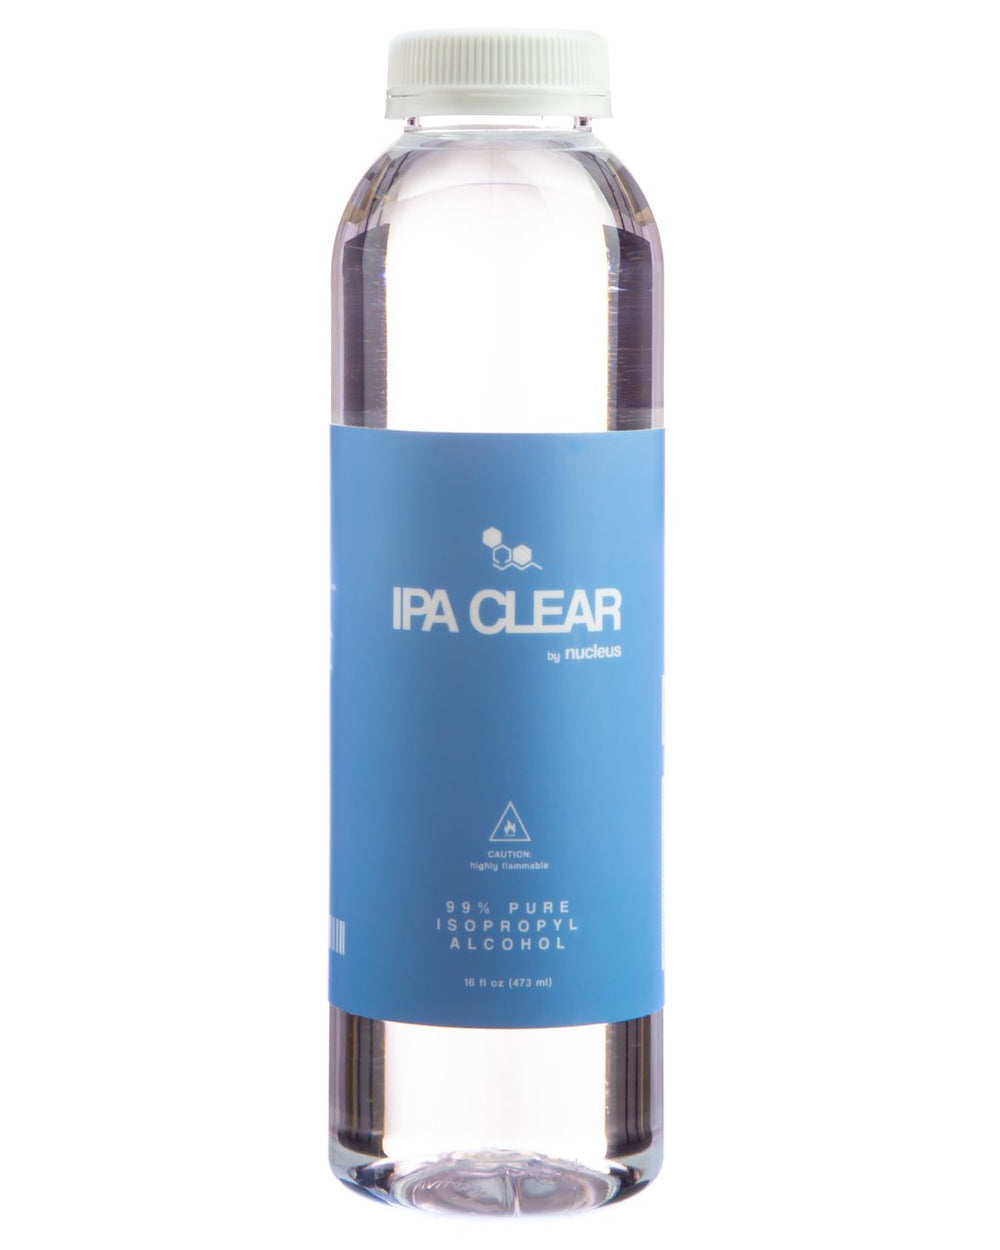 Accessories Nucleus - "IPA Clear" 99% Pure Isopropyl Alcohol